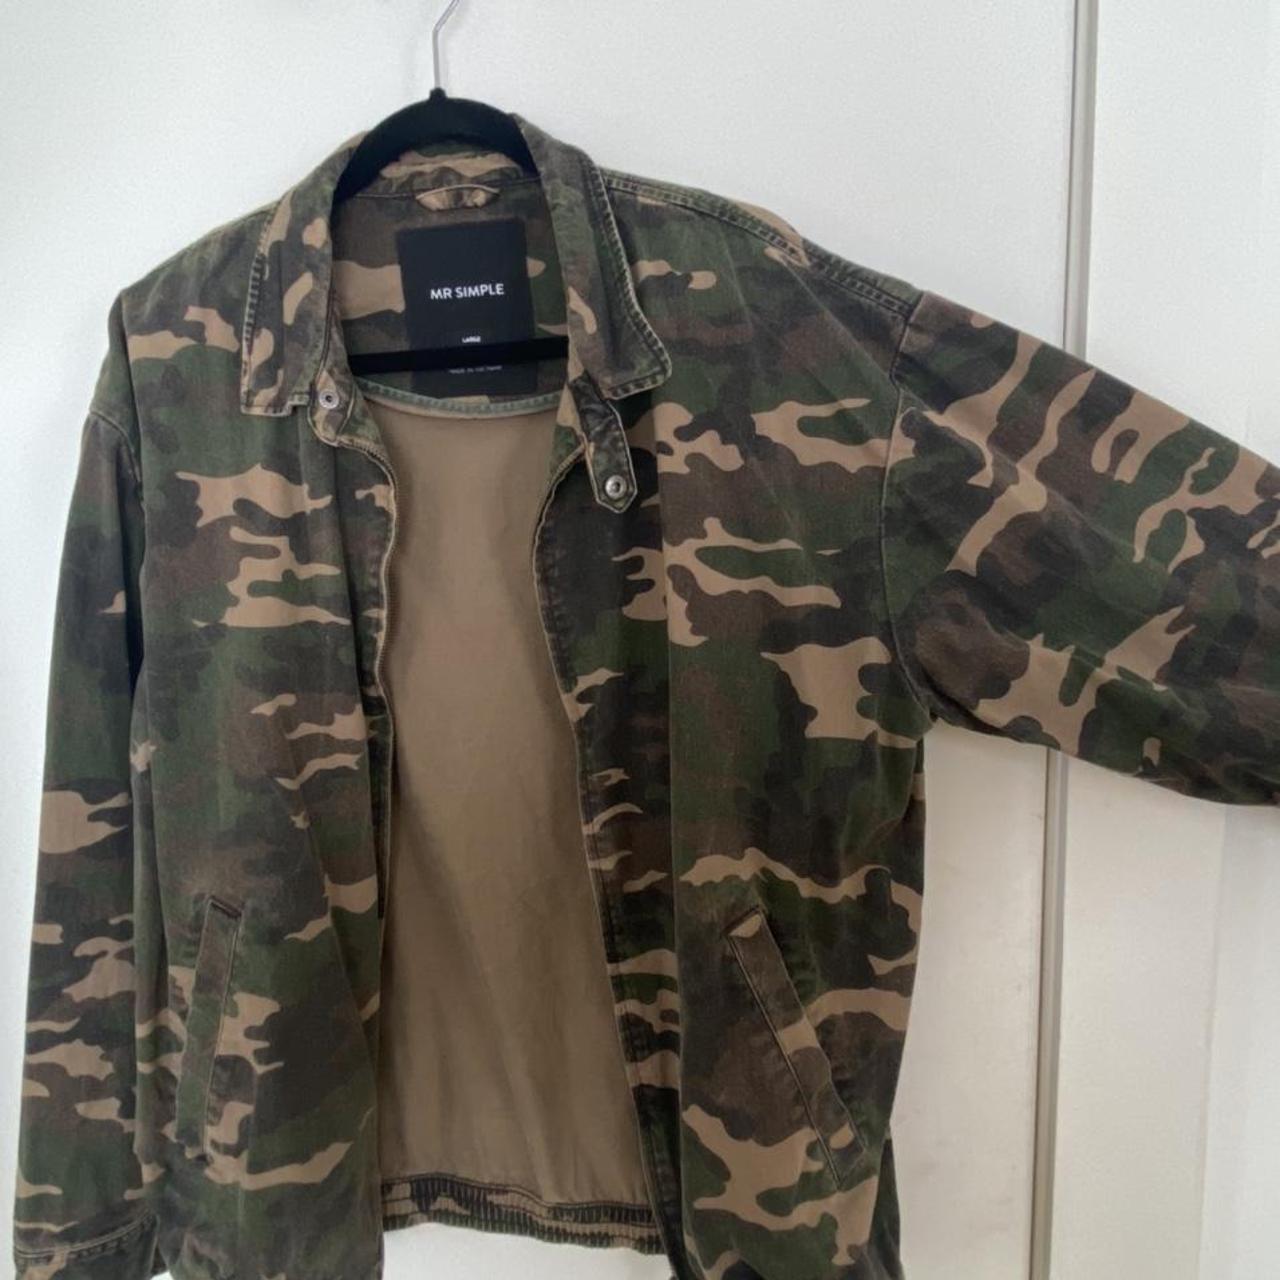 Product Image 2 - Camo jacket from Mr Simple,